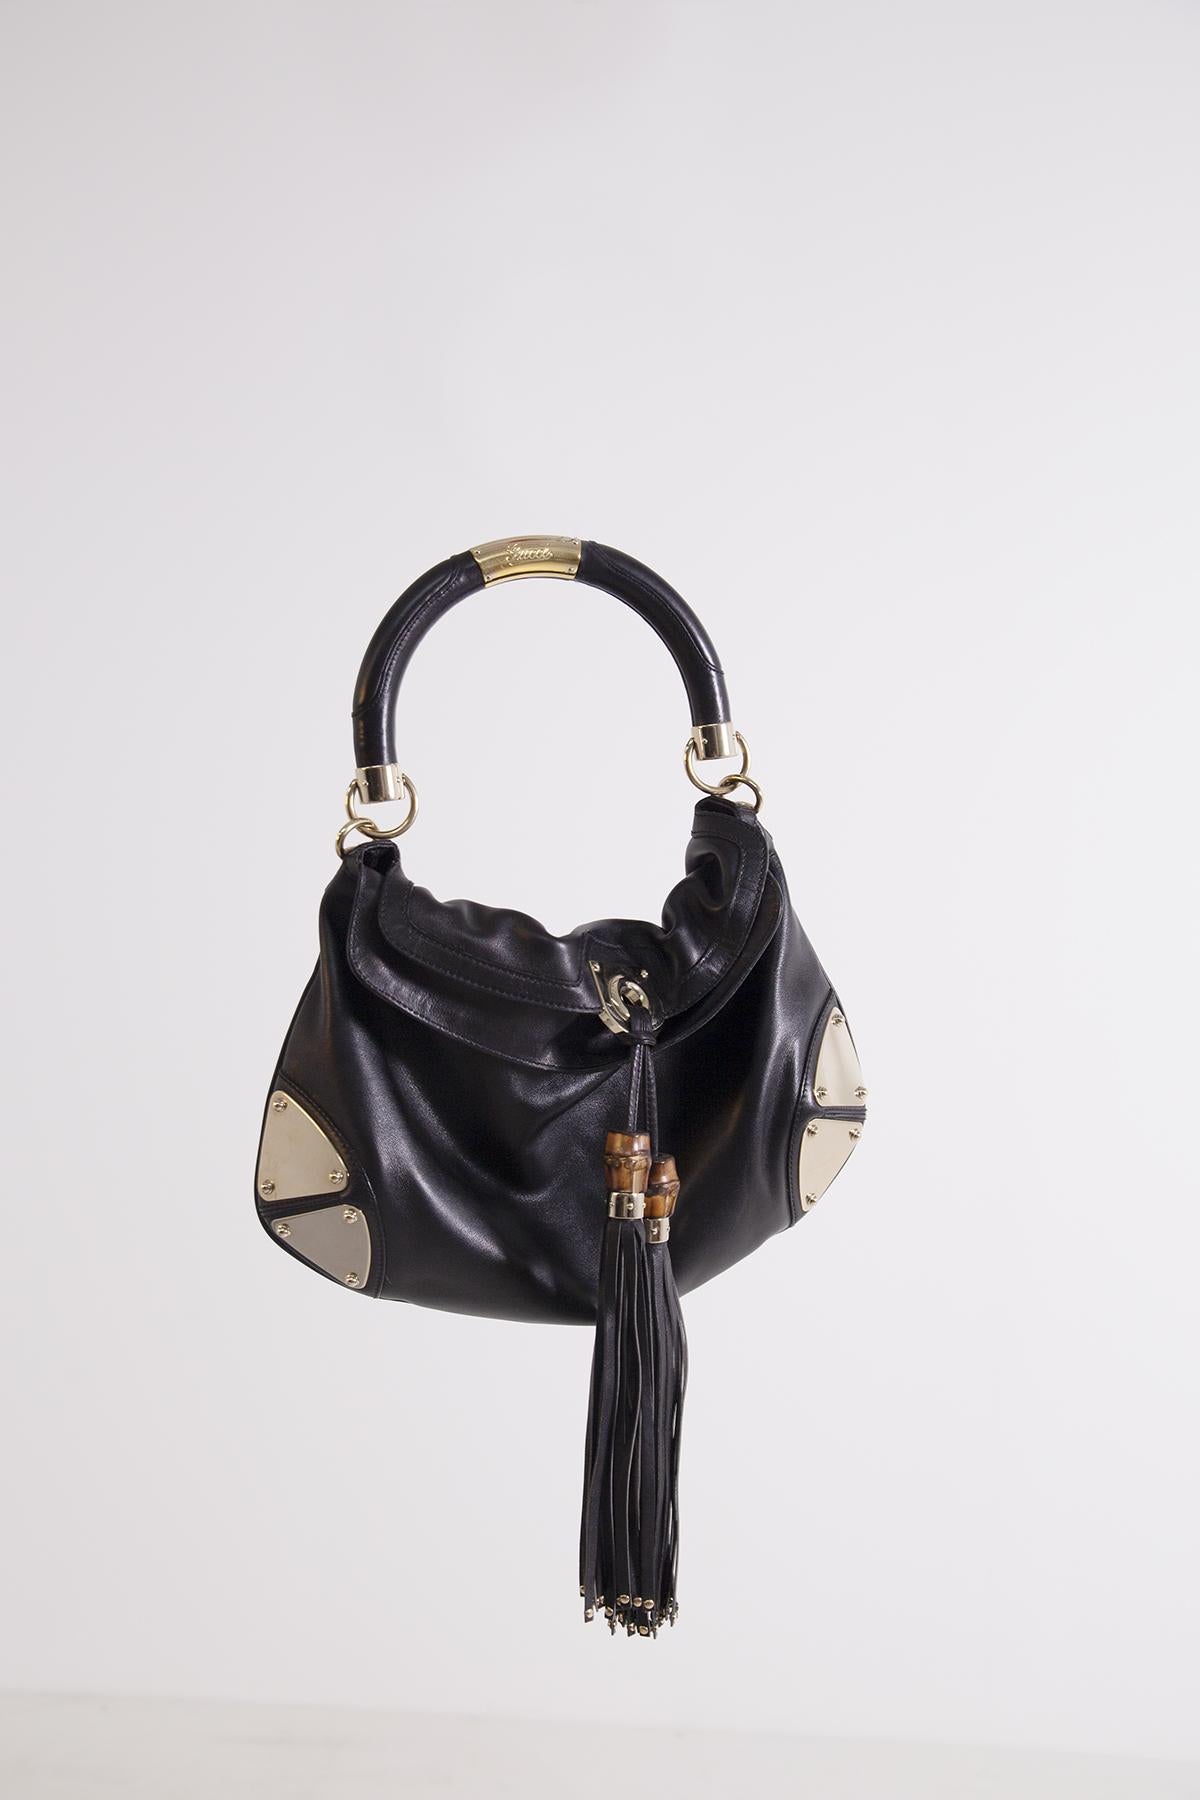 Gucci Indy Babouska Leather Bag in Gold Metal Black w Fringes In Excellent Condition In Milano, IT